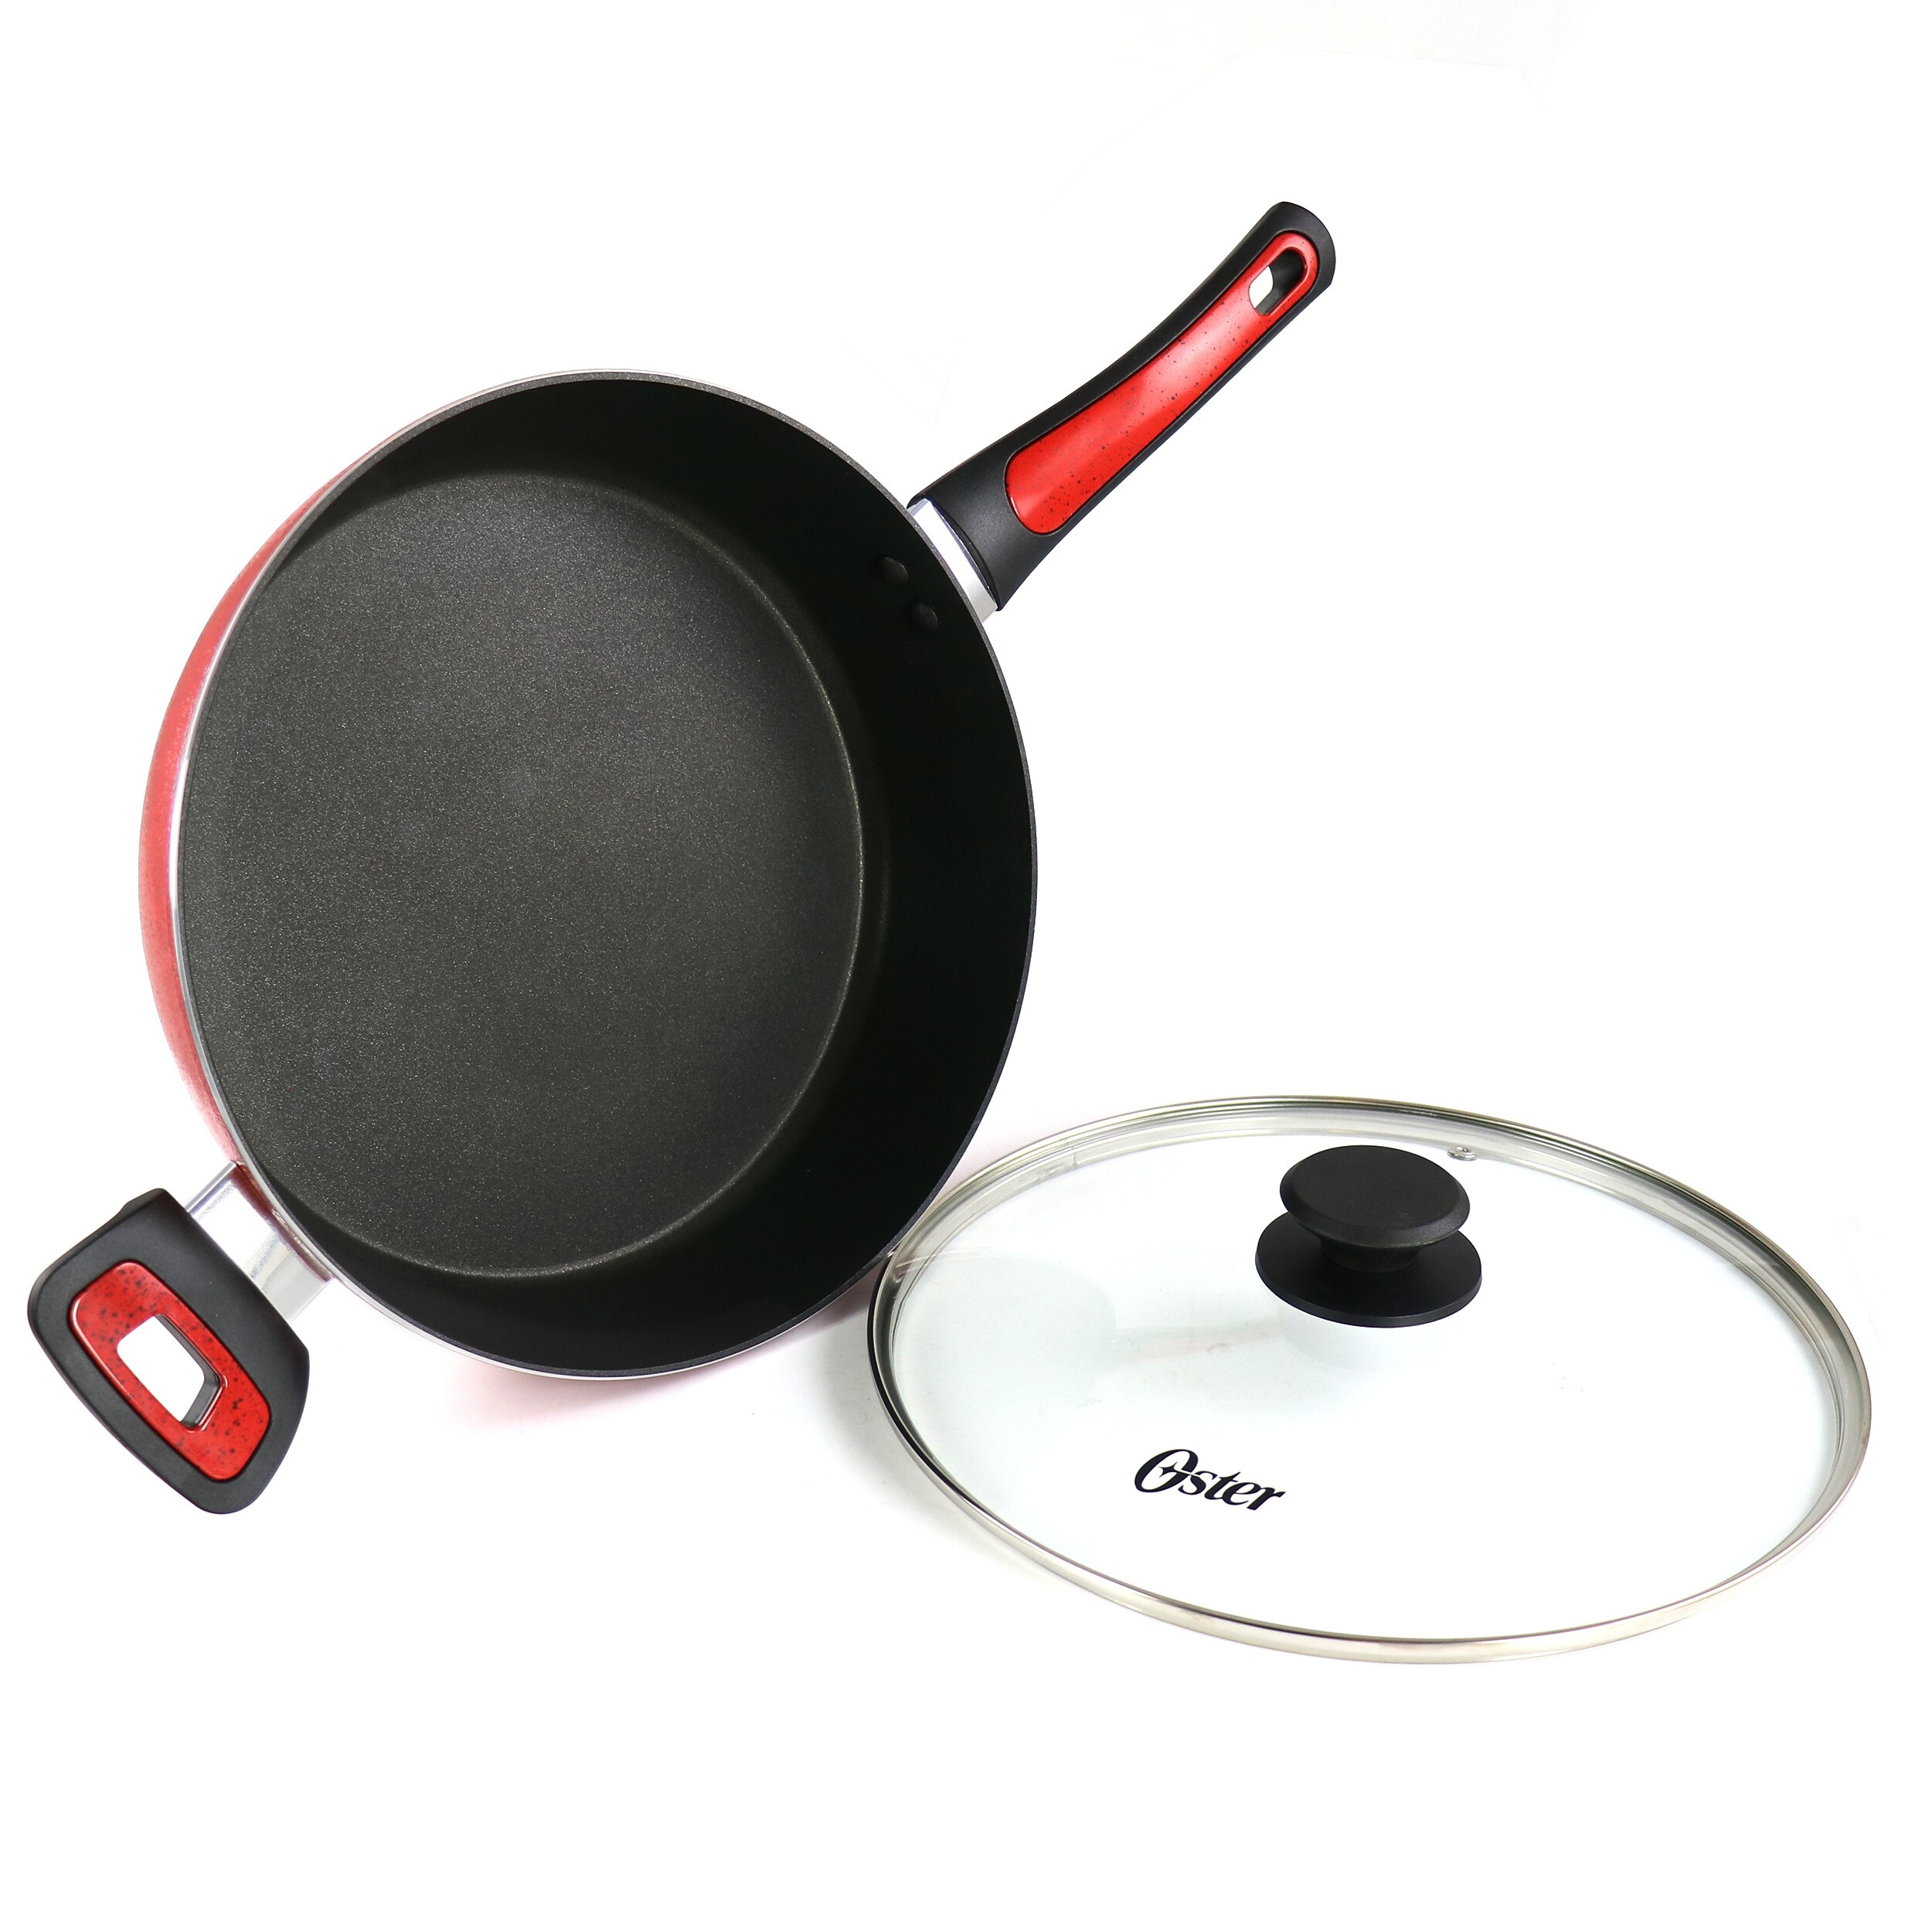 https://ak1.ostkcdn.com/images/products/is/images/direct/d606f228dae04540987c1c4fcd209e95c2fd19a9/3.8-Quart-Nonstick-Saute-Pan-With-Lid-in-Speckled-Red.jpg